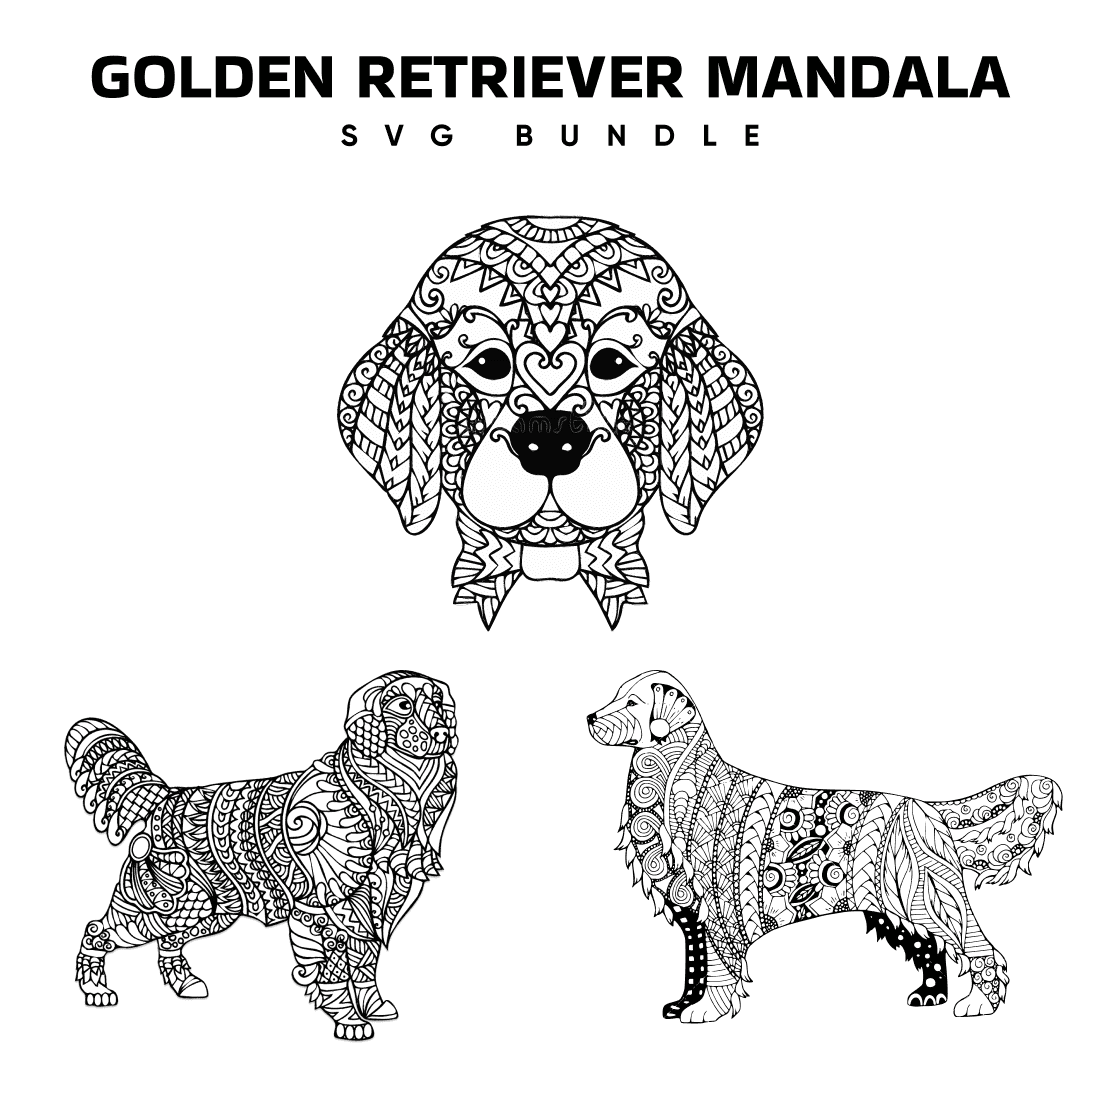 Black and white mandala image in the shape of a golden retriever.